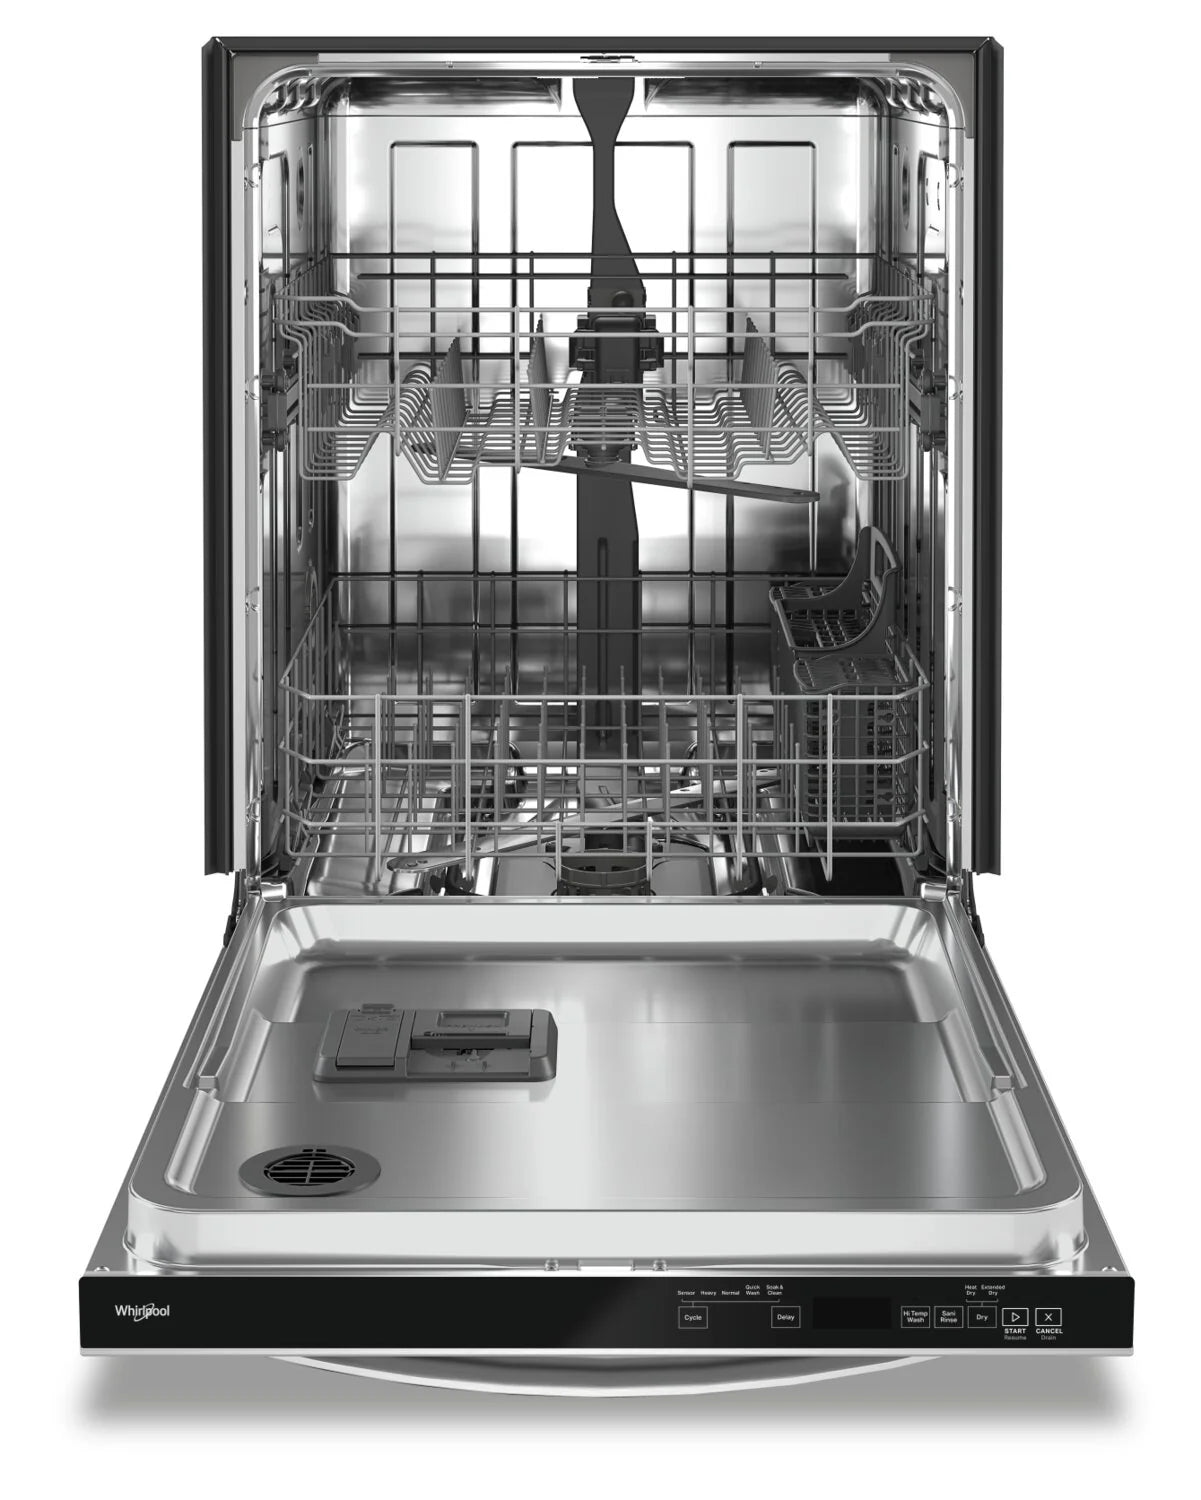 Whirlpool Large Capacity Dishwasher with Deep Top Rack WDT740SALZ